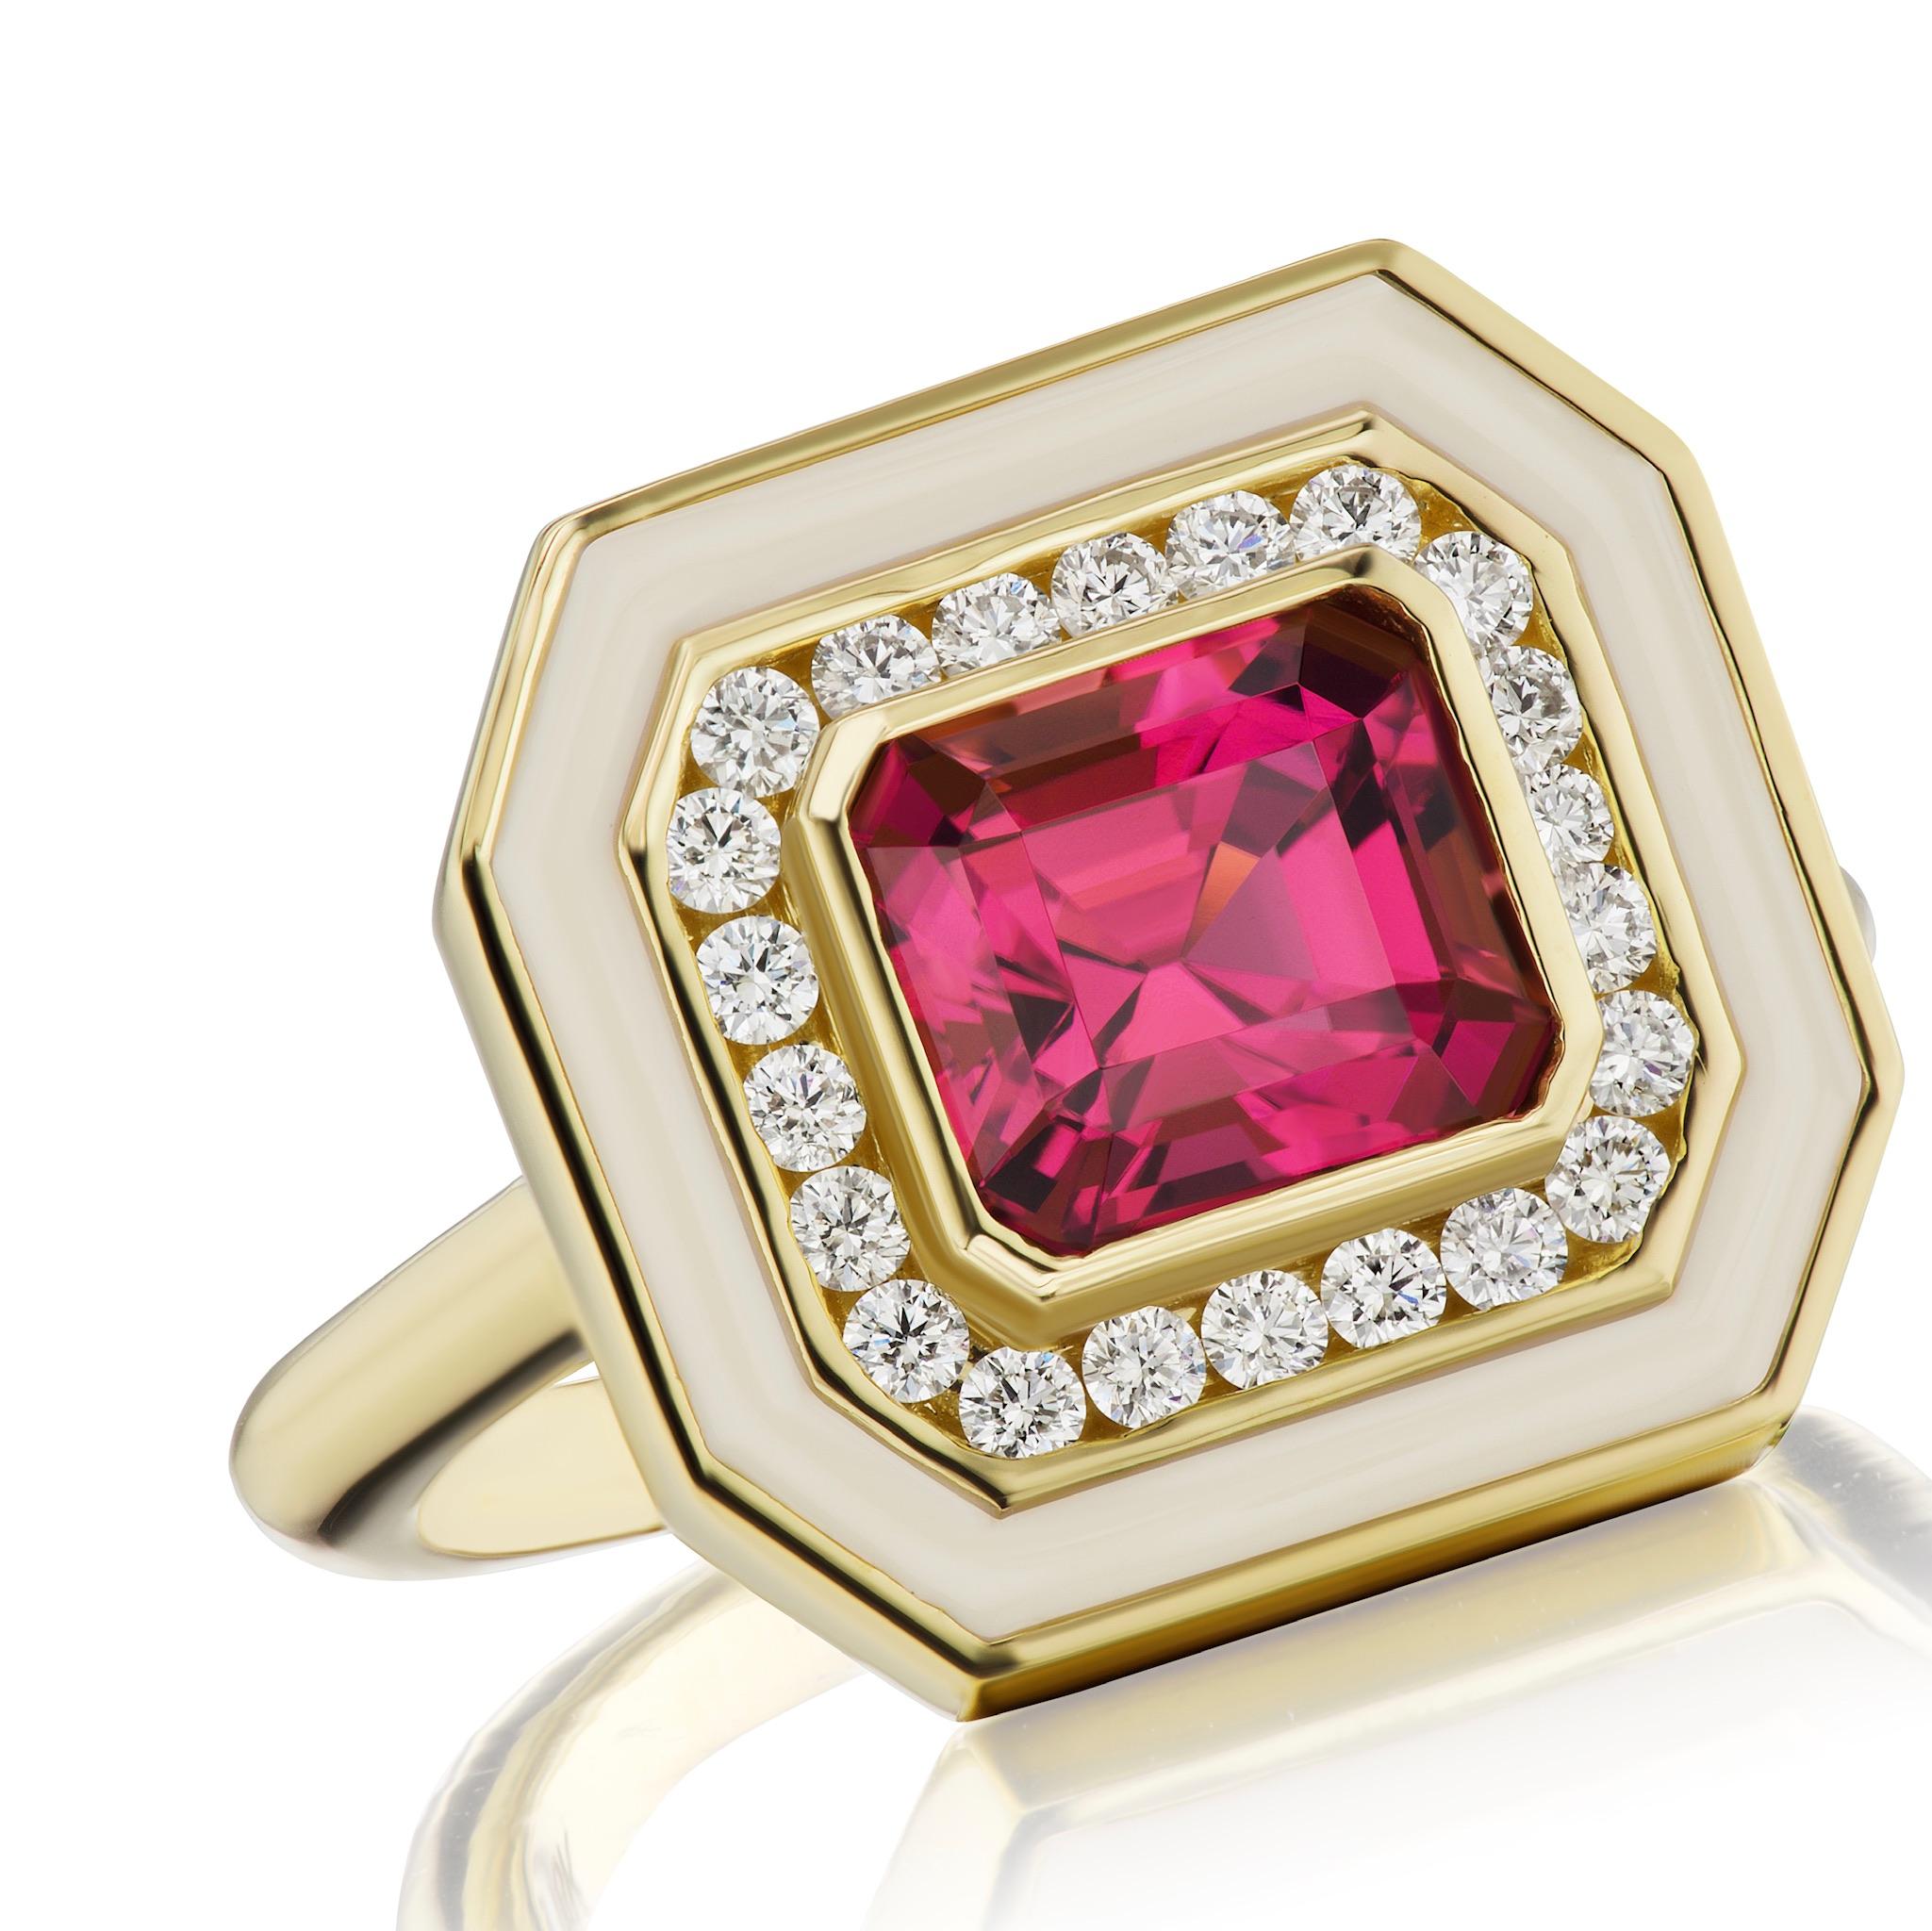 A beautiful 2.12 carat Redish-Pink Asscher cut Tourmaline by Andrew Glassford. It is a mesmerizing stone that has been set and surrounded by .33 carats of GH VSI Diamonds, followed by a border of cream colored enamel. This ring is set in 18K Yellow